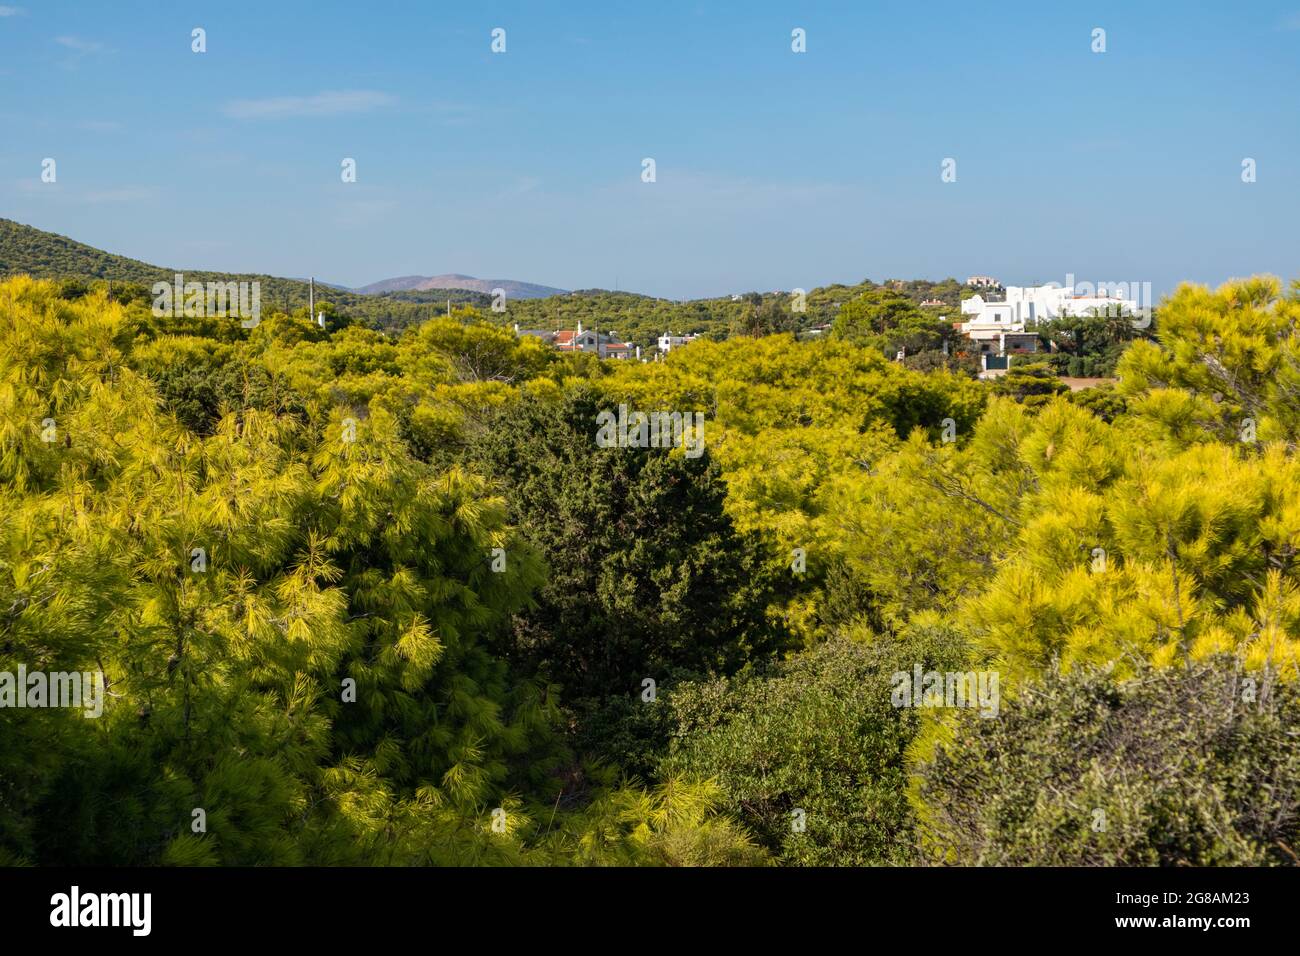 Pine and juniper green trees and bushes, landscape near village in Greece. Vibrant colorful summer view in Mediterranean region Stock Photo